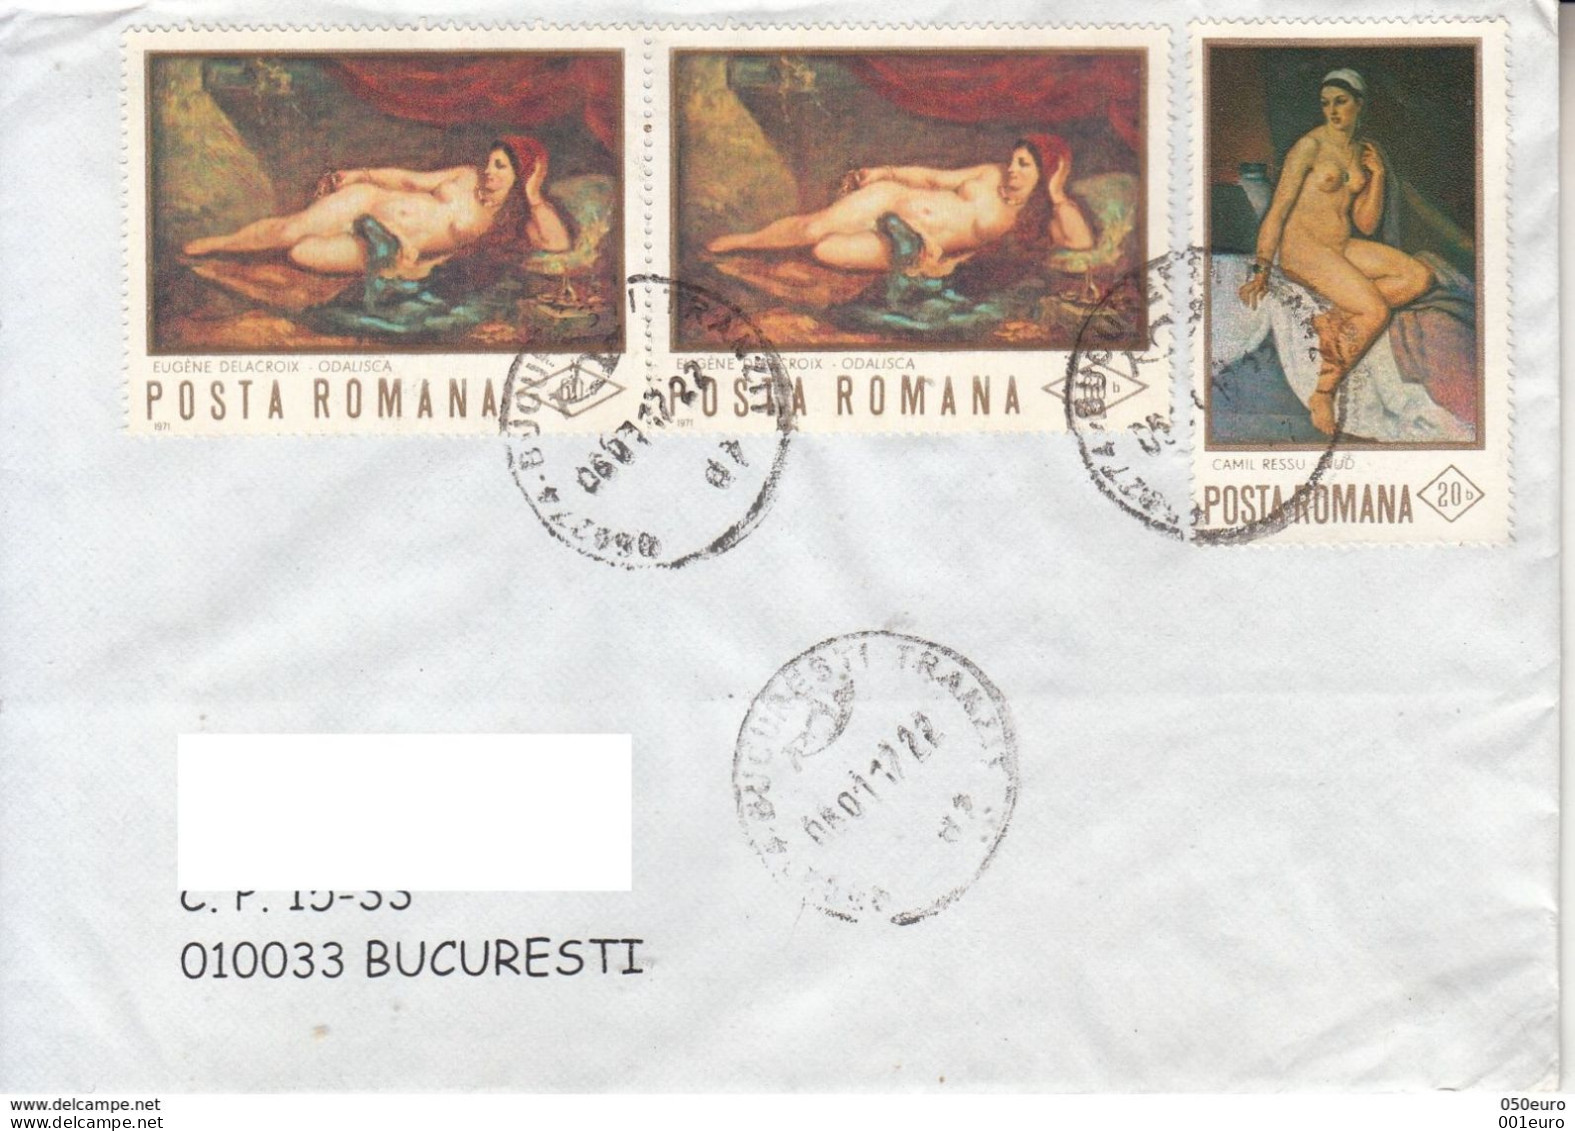 # ROMANIA : Lot Of 4 Covers Circulated As Domestic Letters In Romania #1043364880 - Registered Shipping! - Briefe U. Dokumente